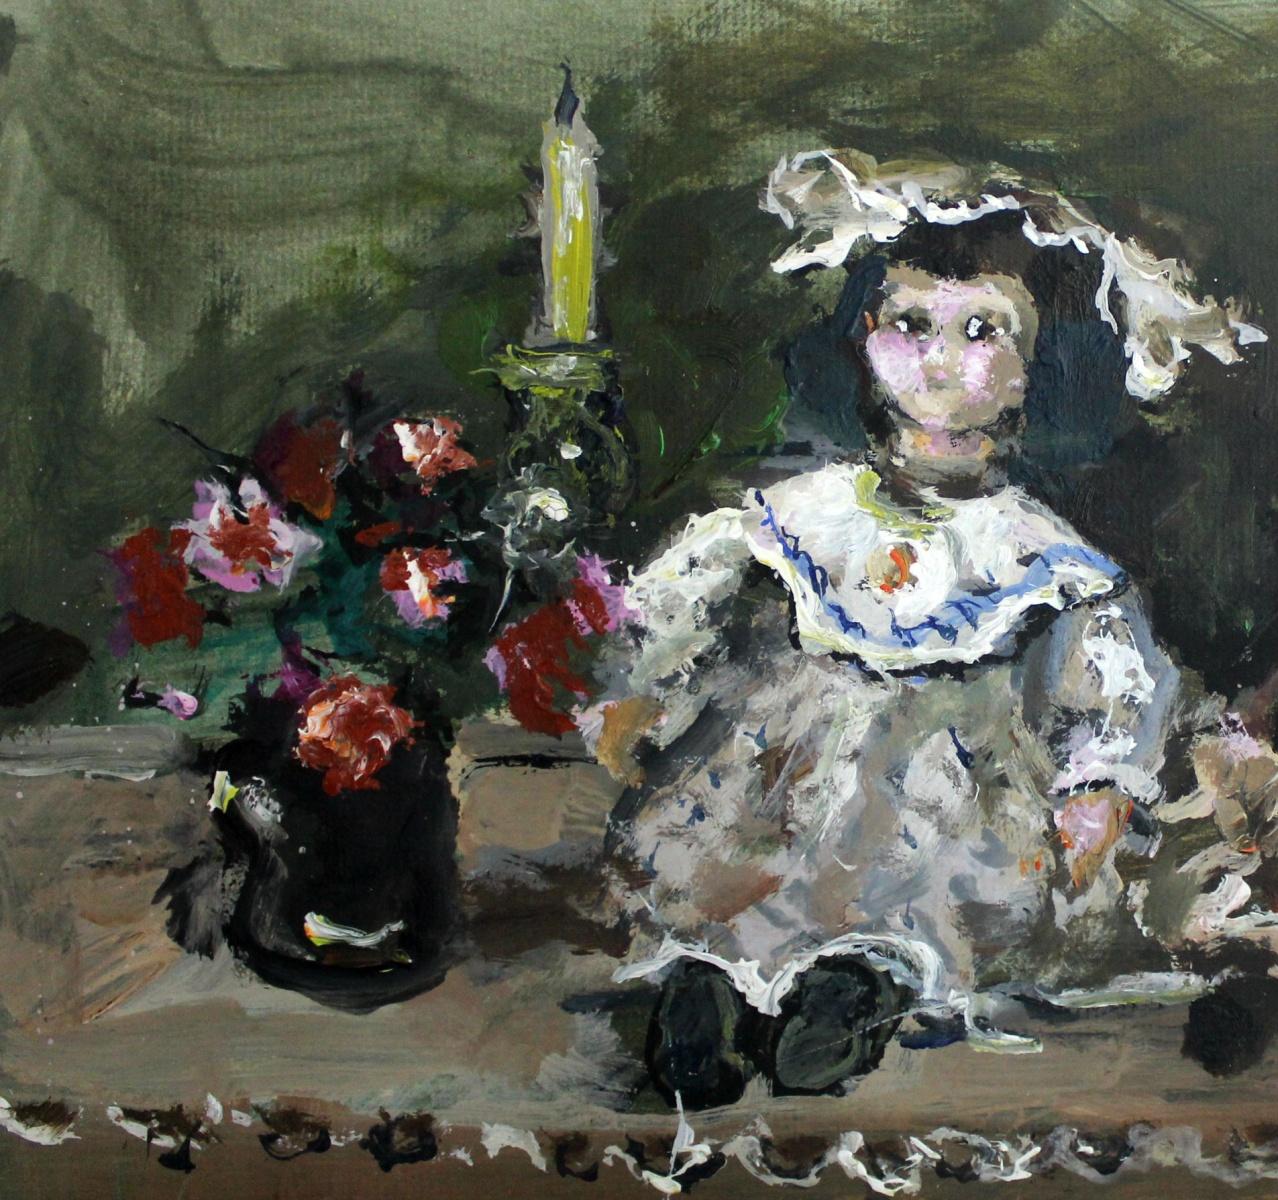 Dolls - 21st century, Oil painting, Figurative, Grey tones, Still life - Other Art Style Painting by Magdalena Spasowicz